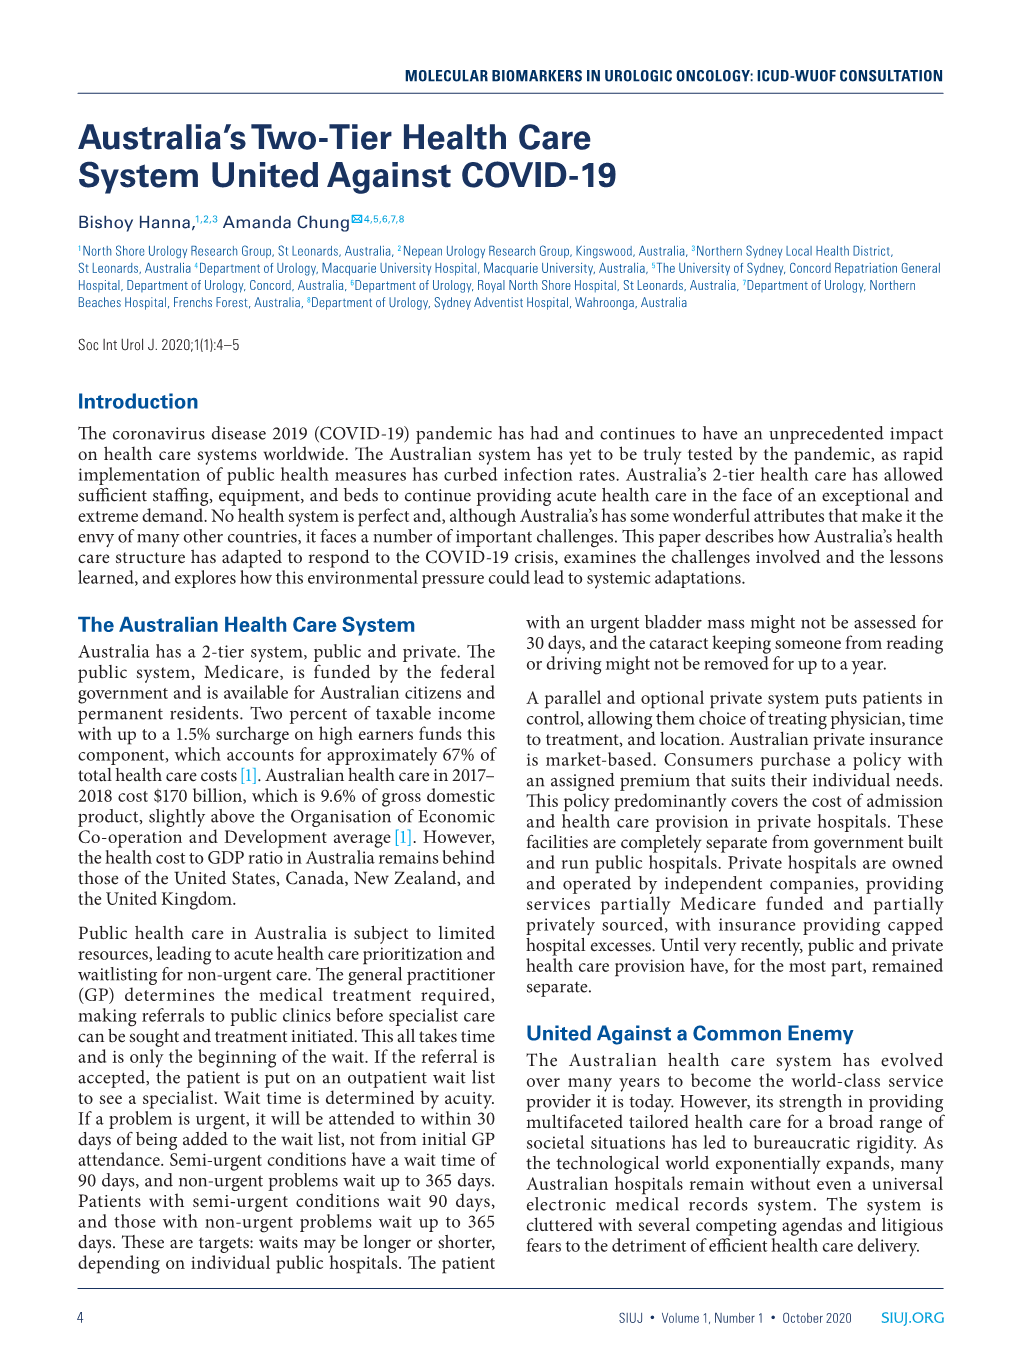 Australia's Two-Tier Health Care System United Against COVID-19